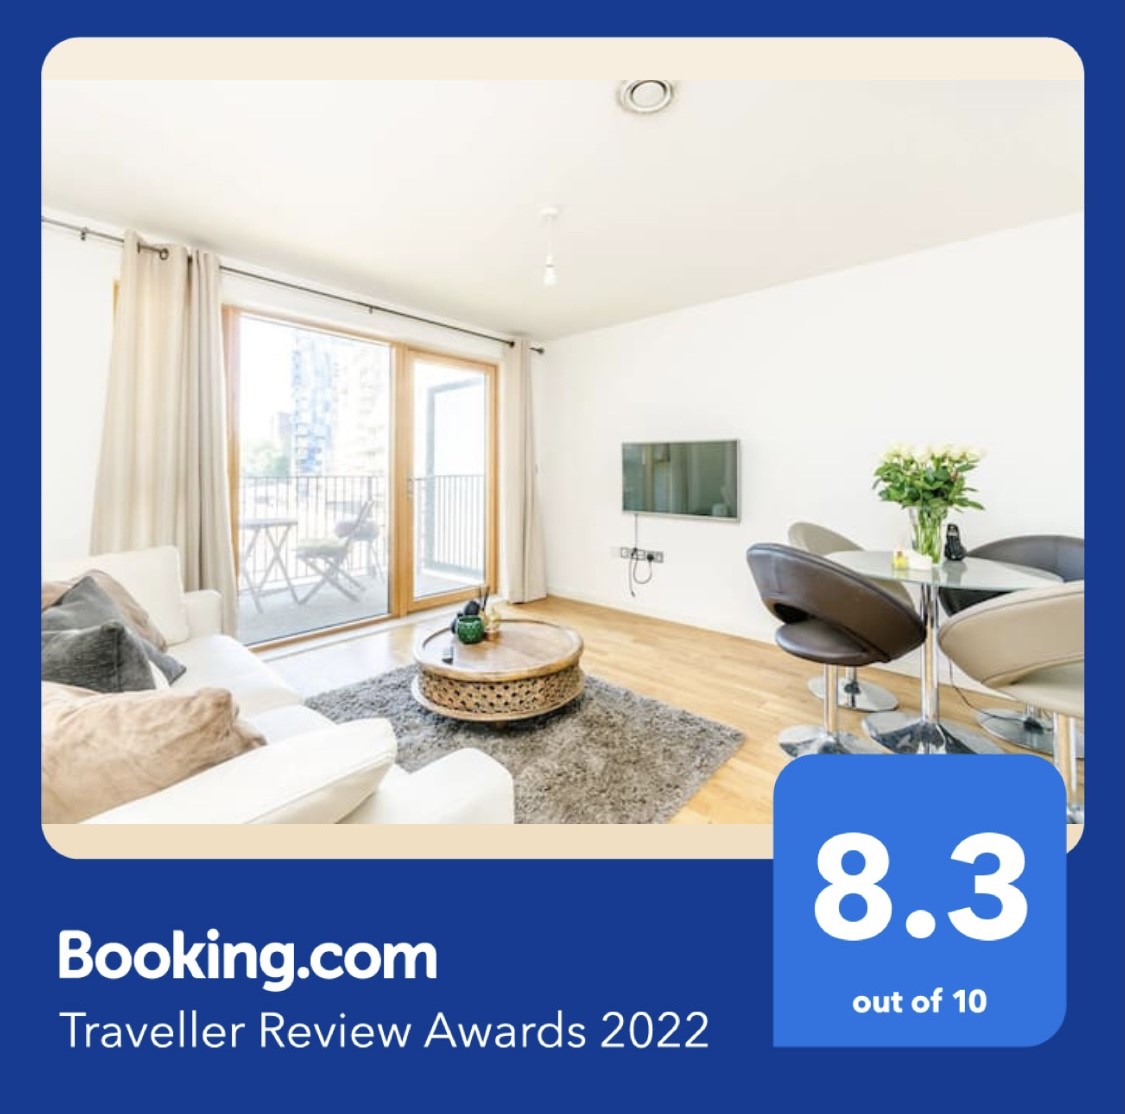 Well that was a nice surprise from @bookingcom  

Awarded a Traveller Review Award 2022 as a result of some happy guests :-)

#TravellerReviewAwards2022